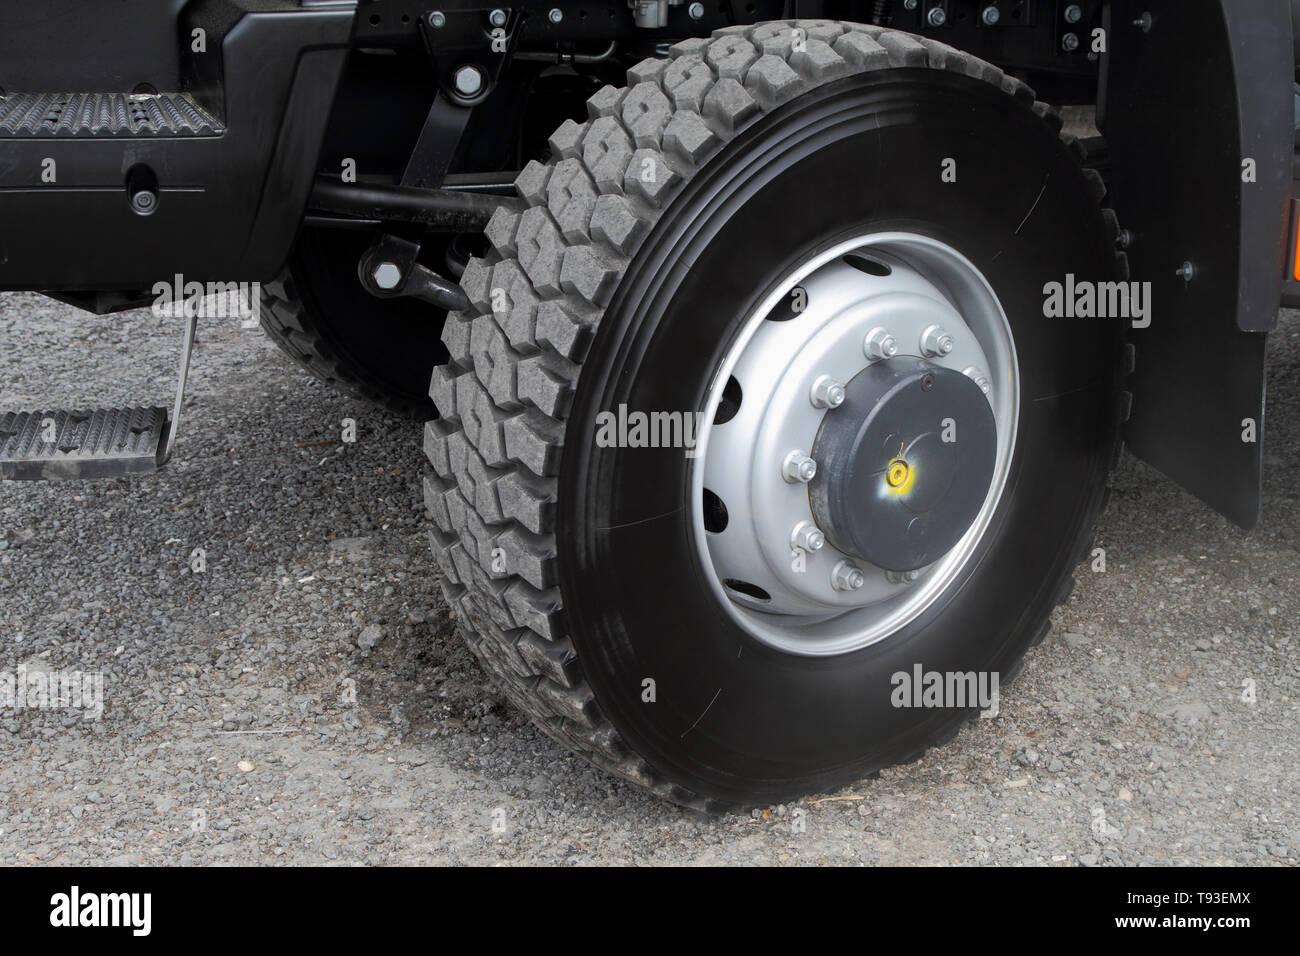 Footboard and front wheel of a modern truck. Stock Photo